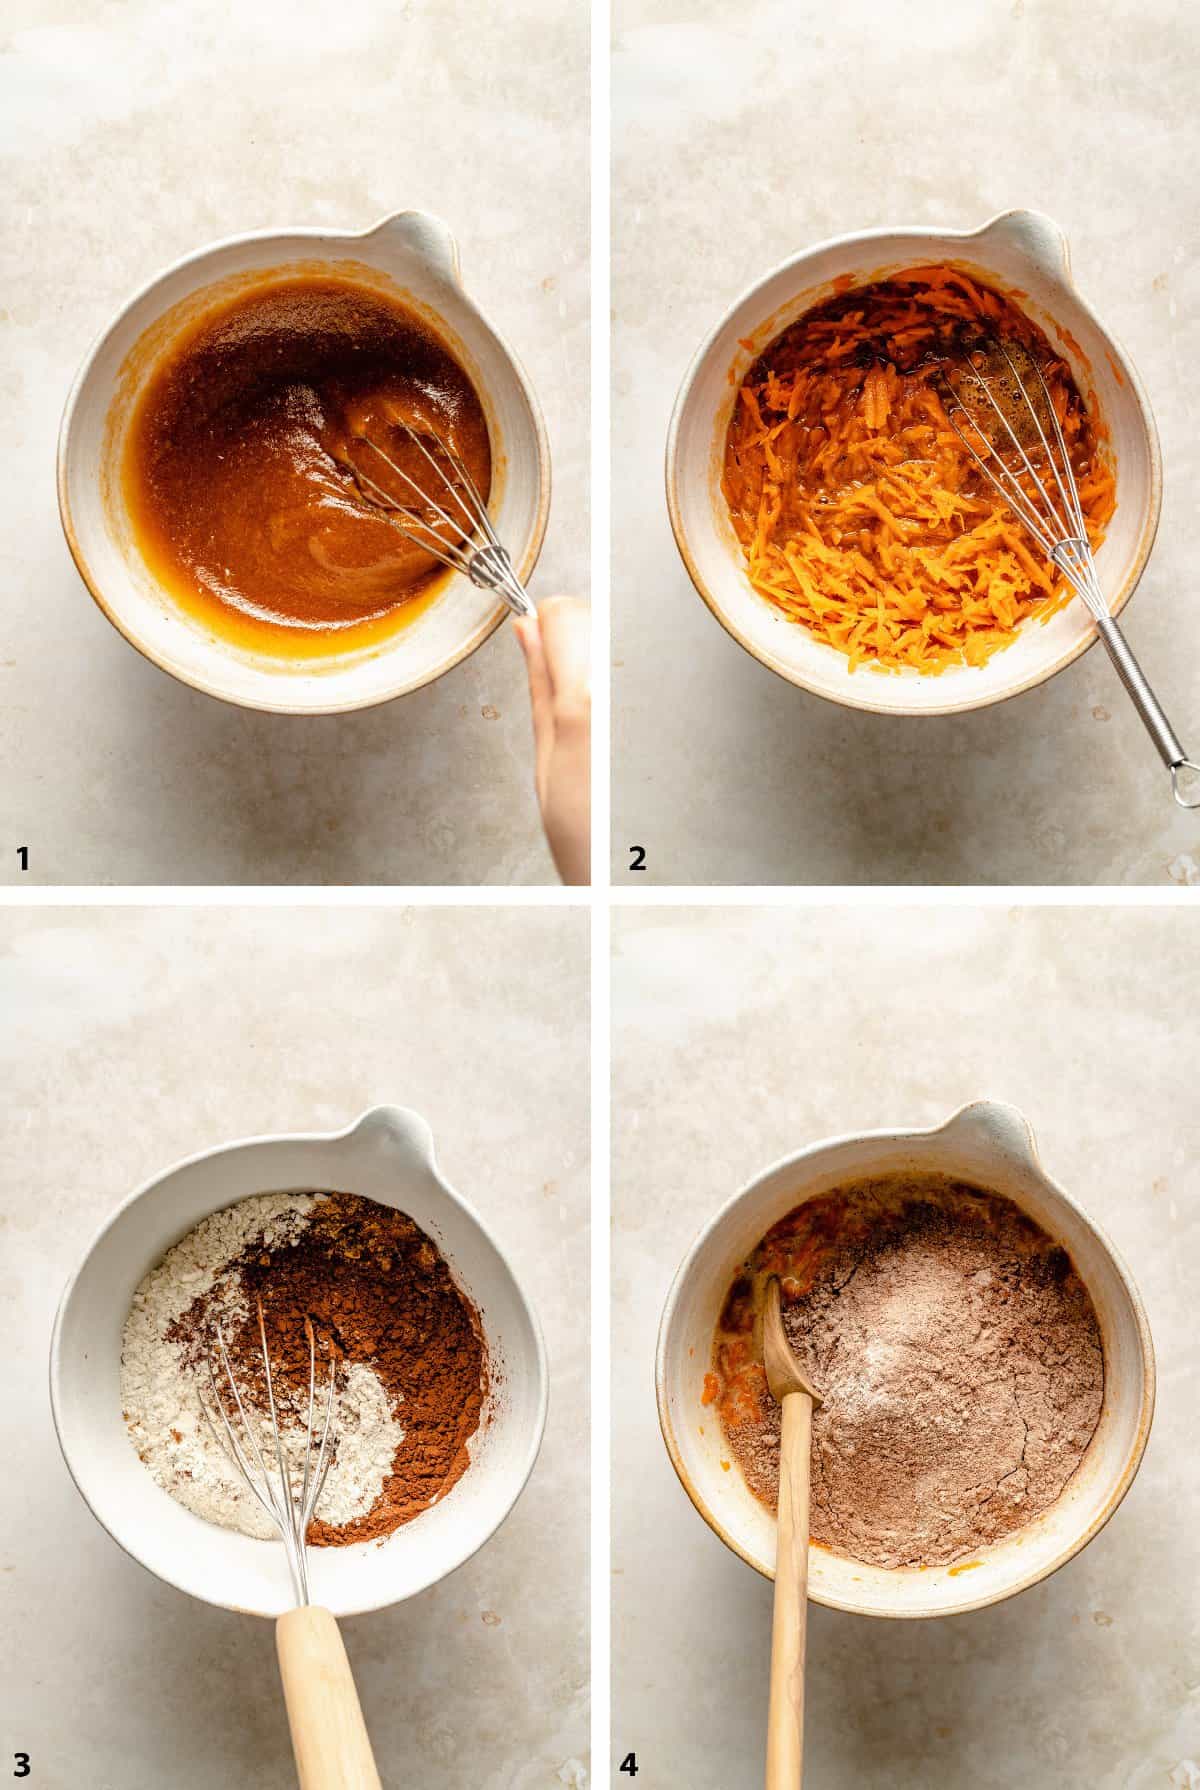 Process steps for creating the wet and dry ingredient mixtures. 